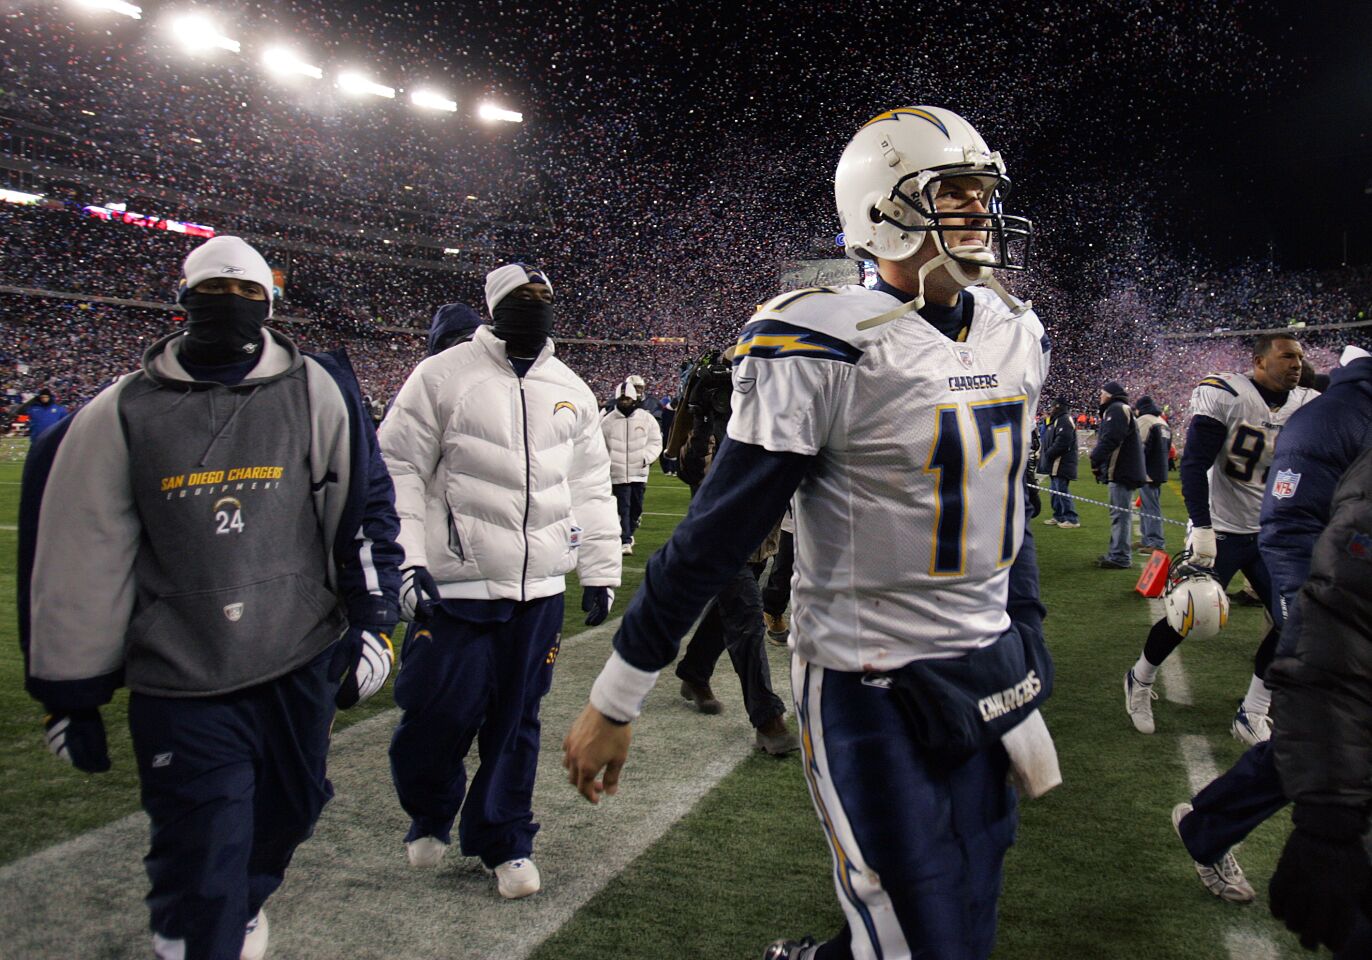 Chargers Philip Rivers of the San Diego Chargers walks off after a loss in the AFC Championship game to the New England Patriots on January 20, 2008 at Gillette Stadium.